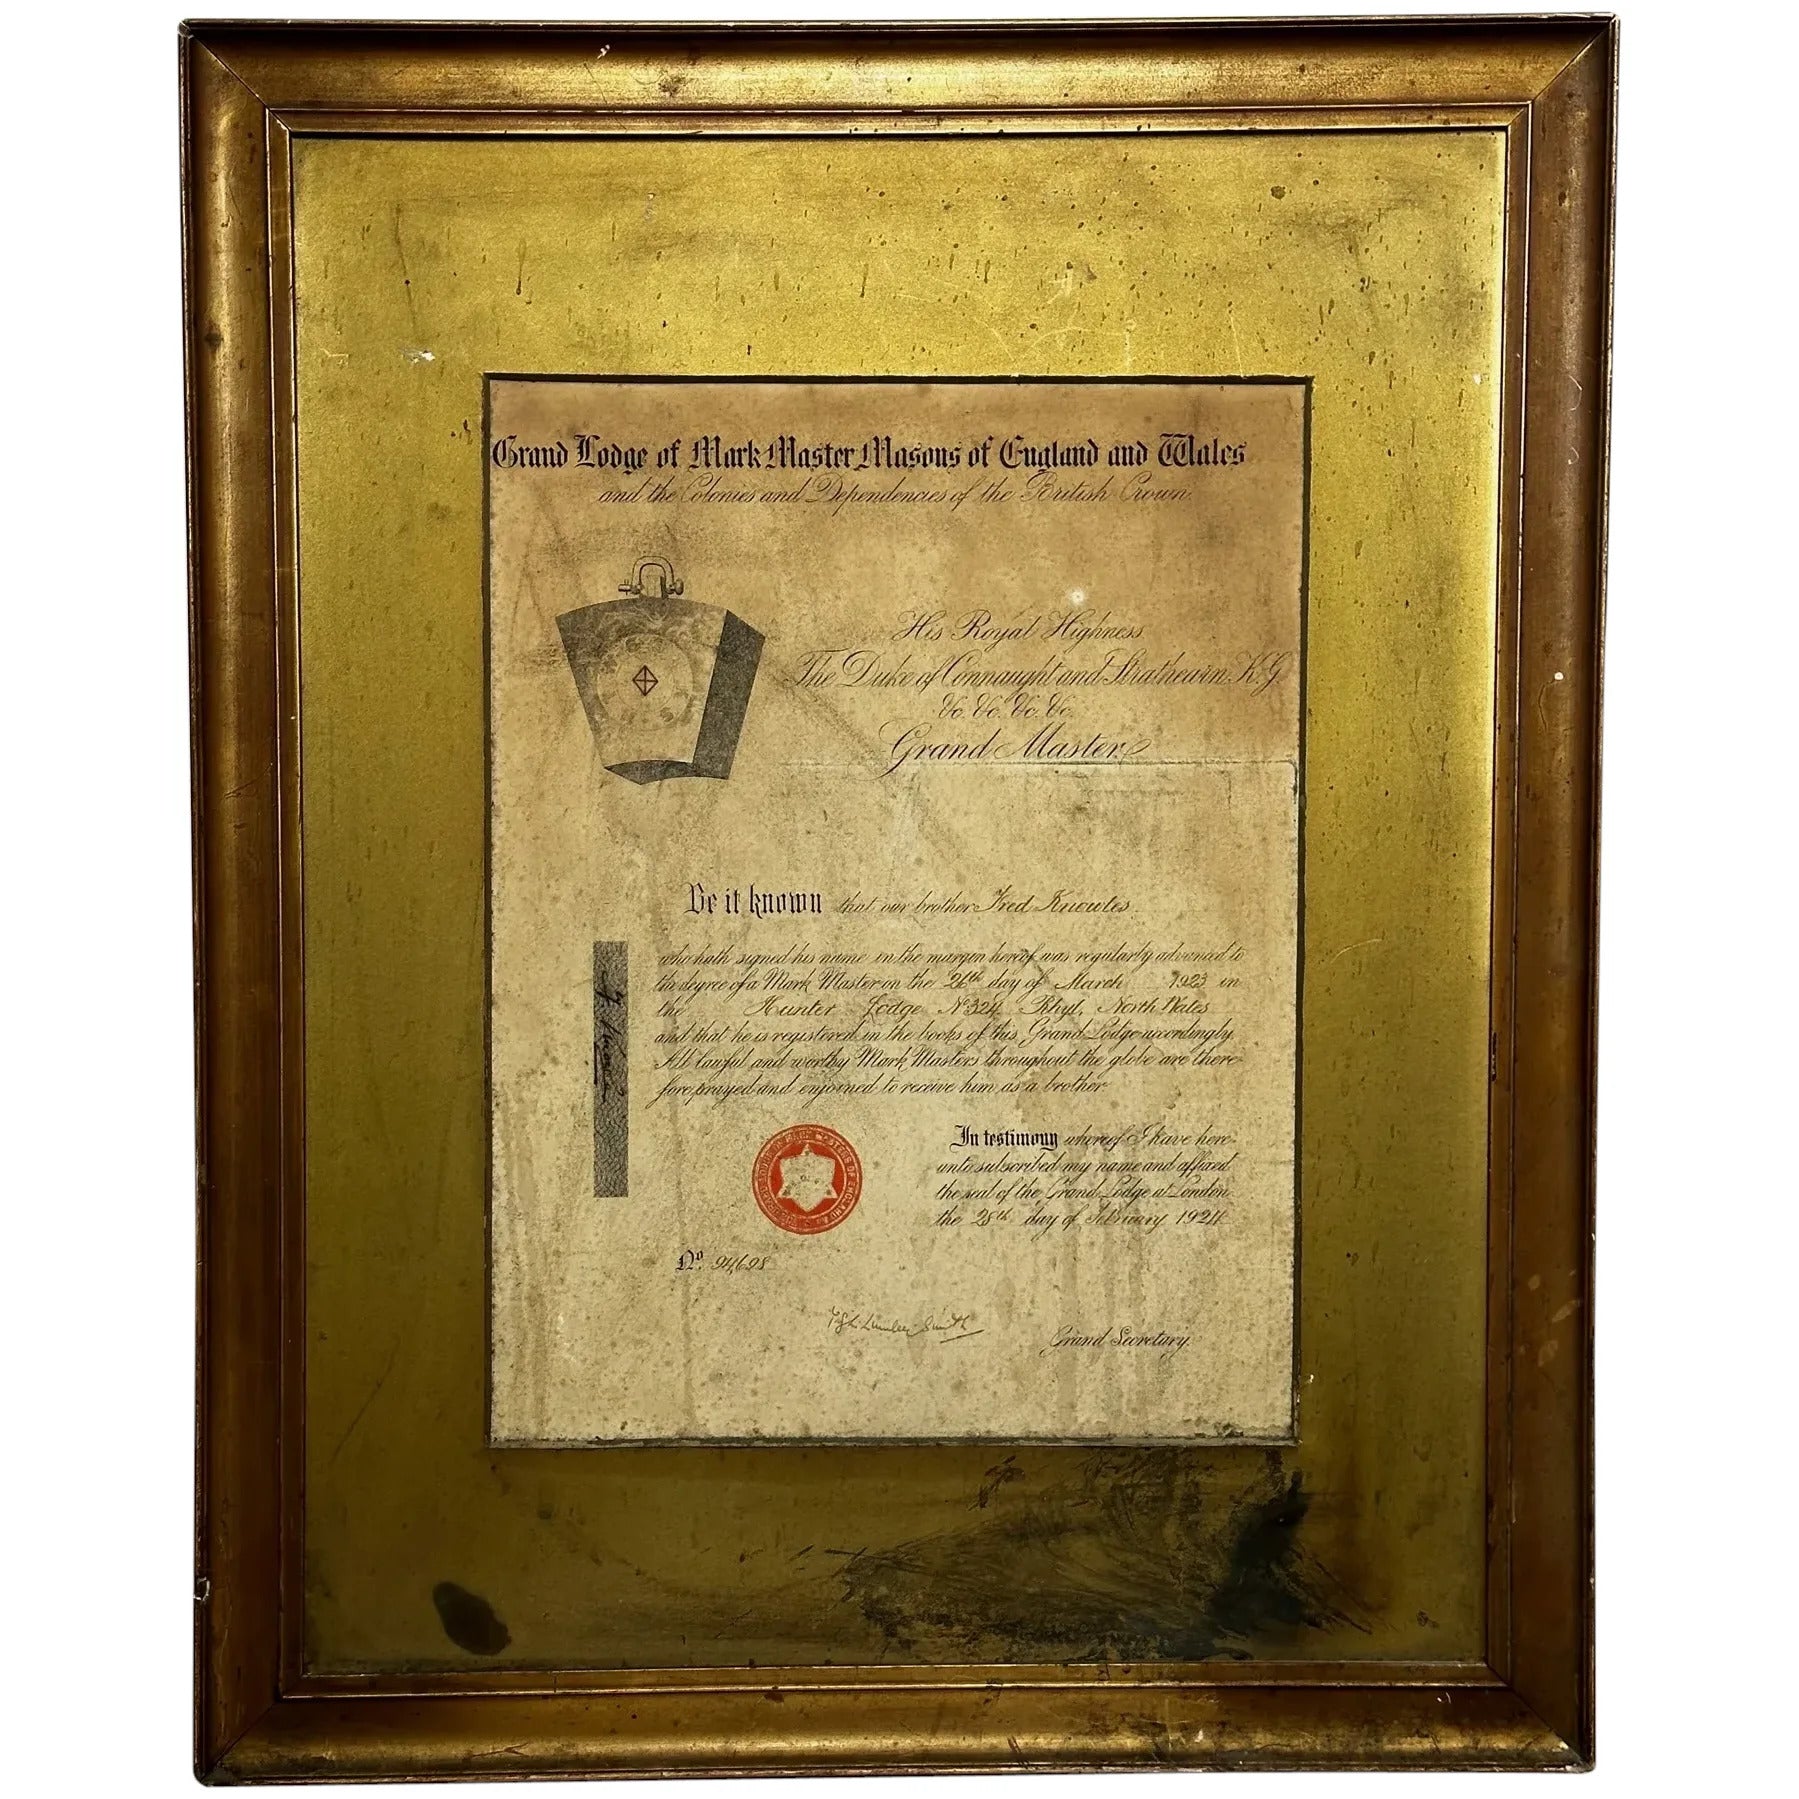 Masonic Grand Lodge Signed Framed Certificate Mark Master Masons of England & Wales - Cheshire Antiques Consultant